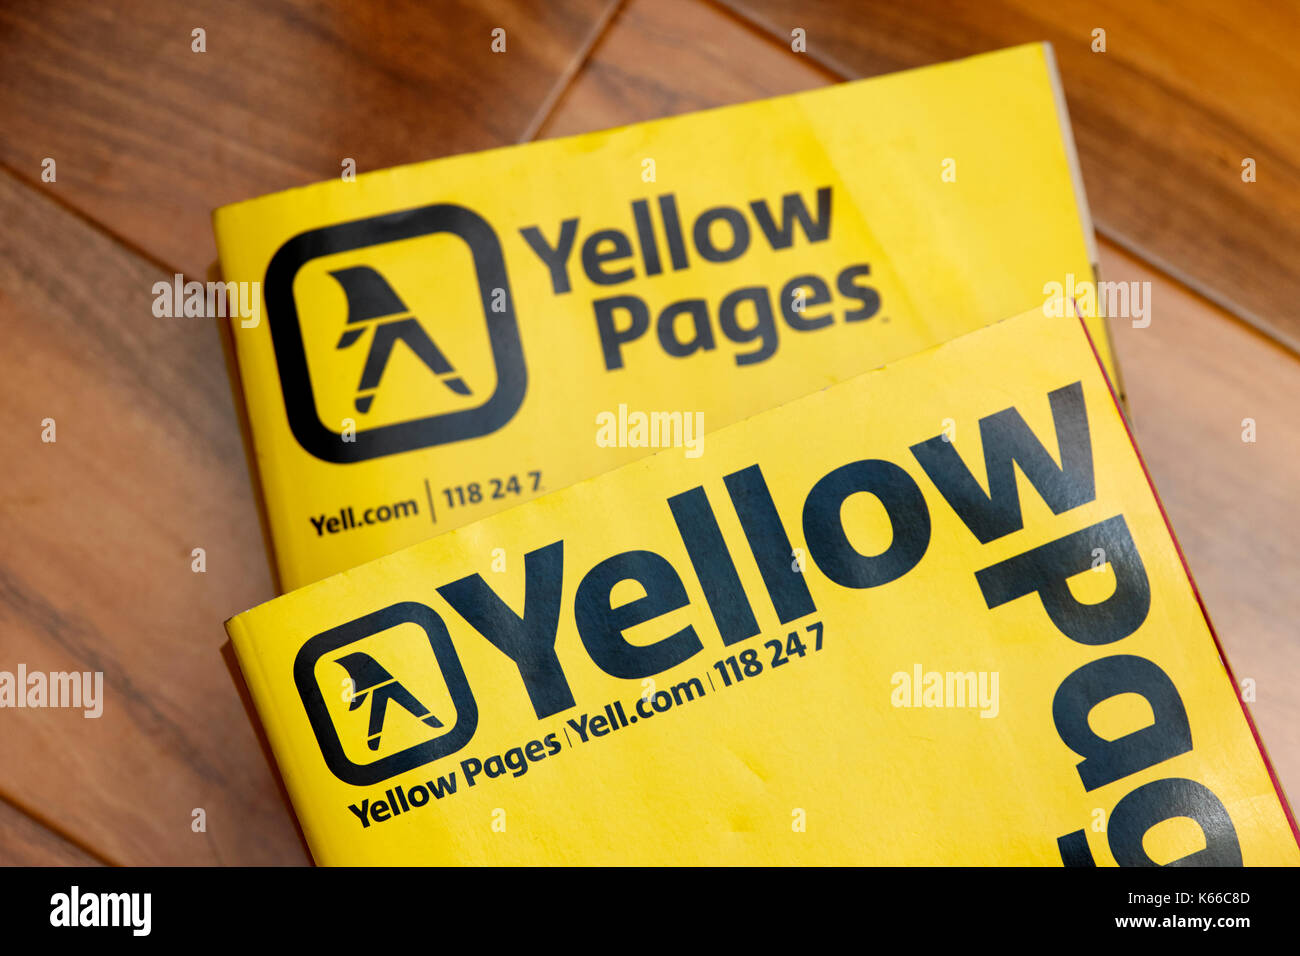 larger older versions of yellow pages classified telephone directory paper edition uk Stock Photo